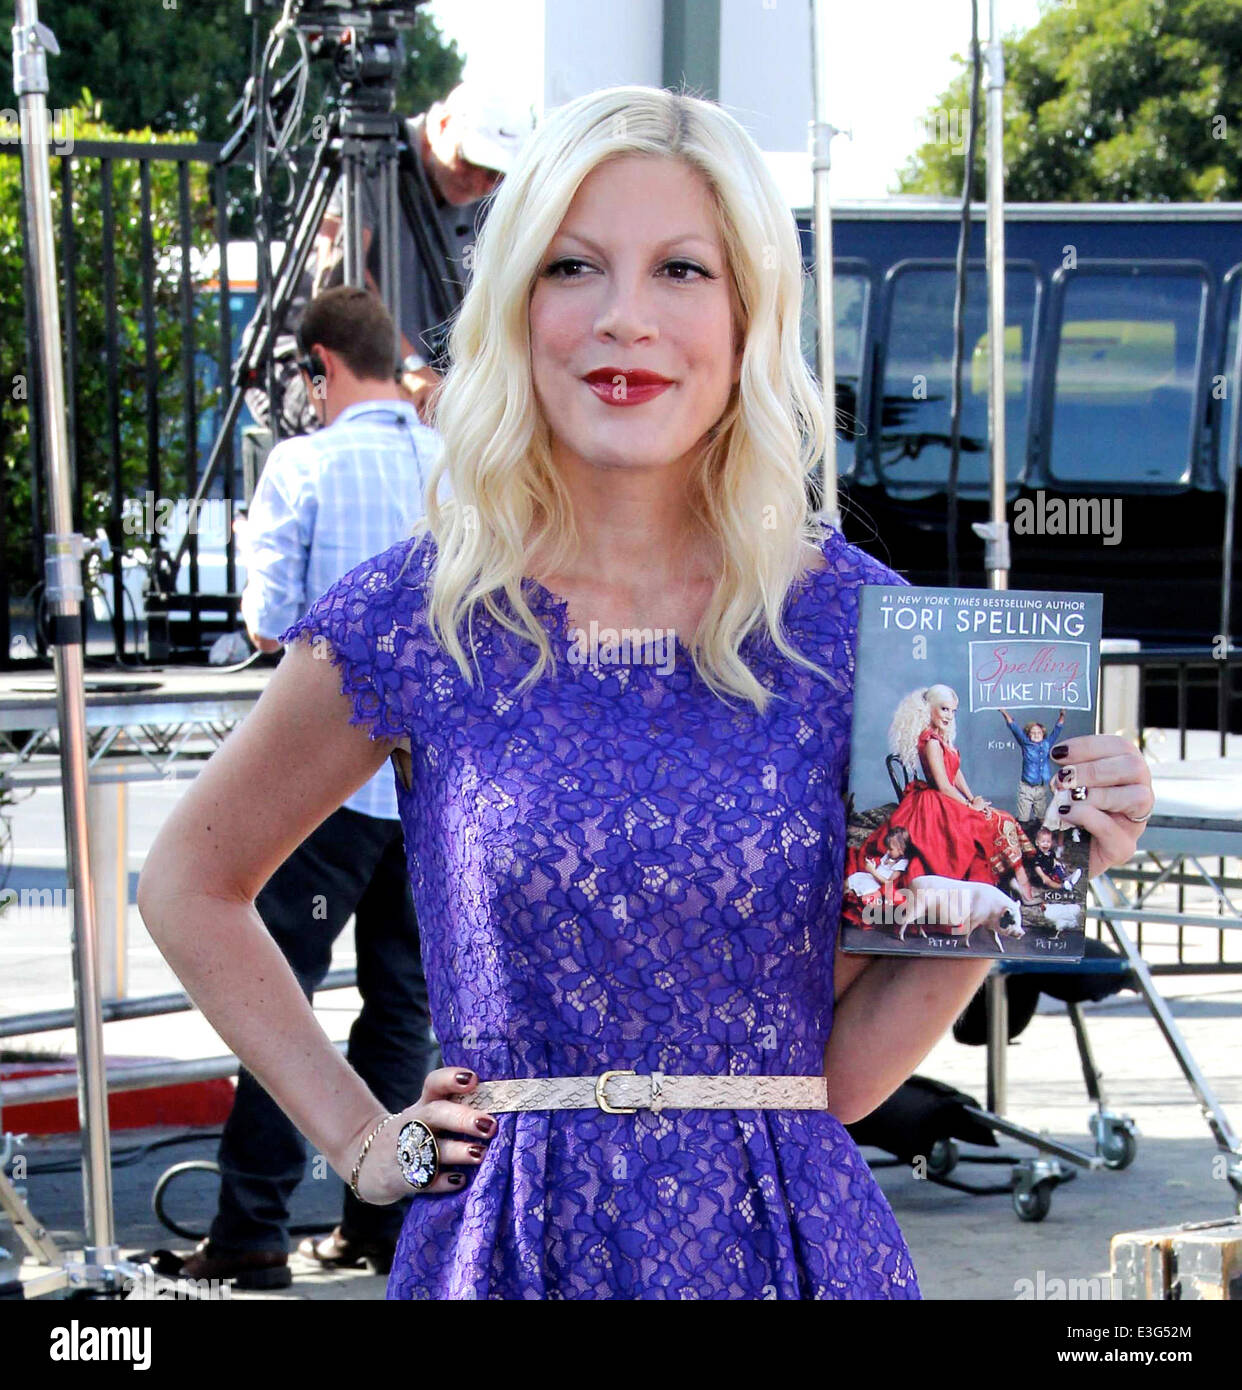 Tori Spelling arrives at The Grove for her appearance on Extra to promote her book 'Spelling It Like It Is'  Featuring: Tori Spelling Where: Los Angeles, California, United States When: 06 Nov 2013 Stock Photo